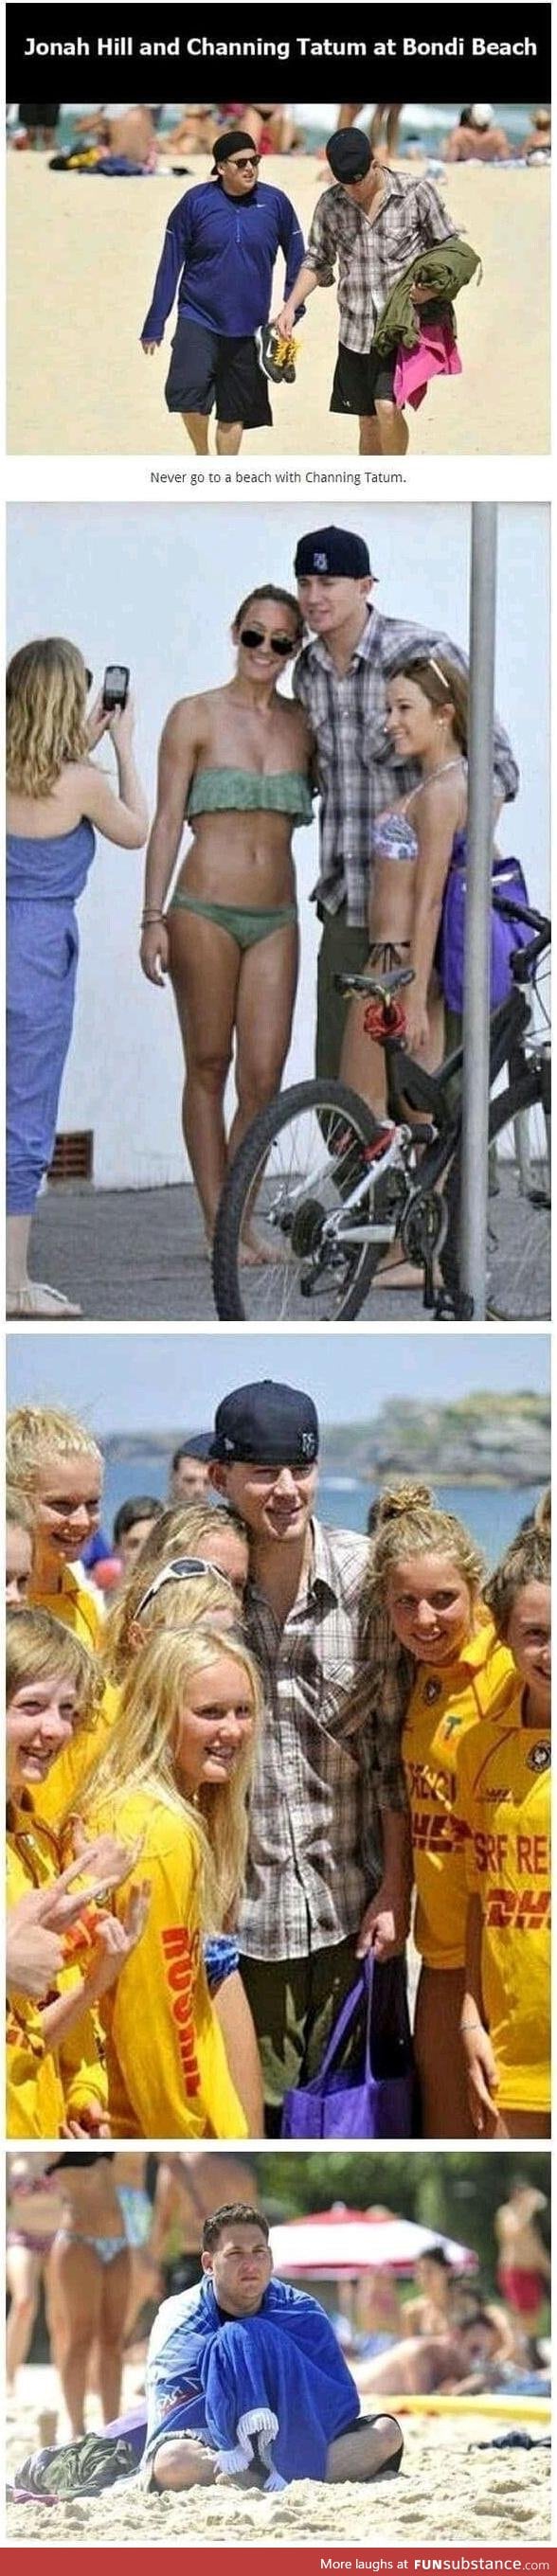 Never go to a beach with Channing Tatum